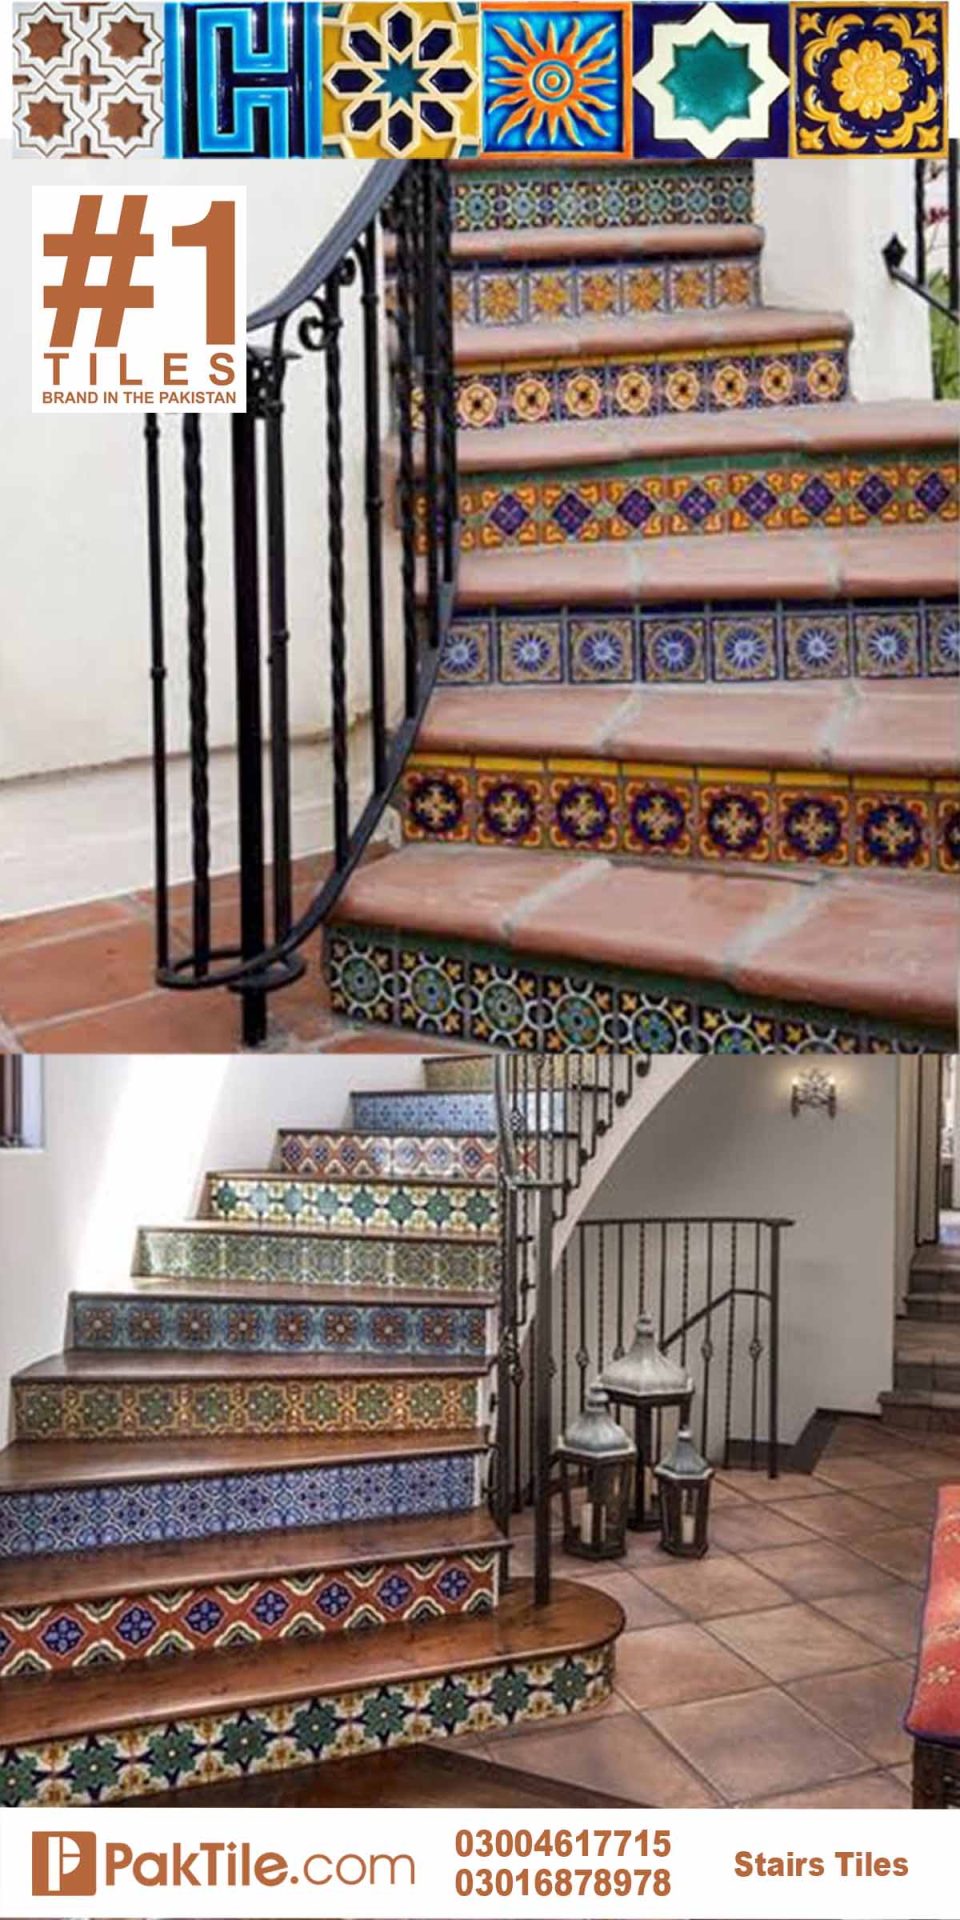 Mosaic Stair Tiles in Islamabad